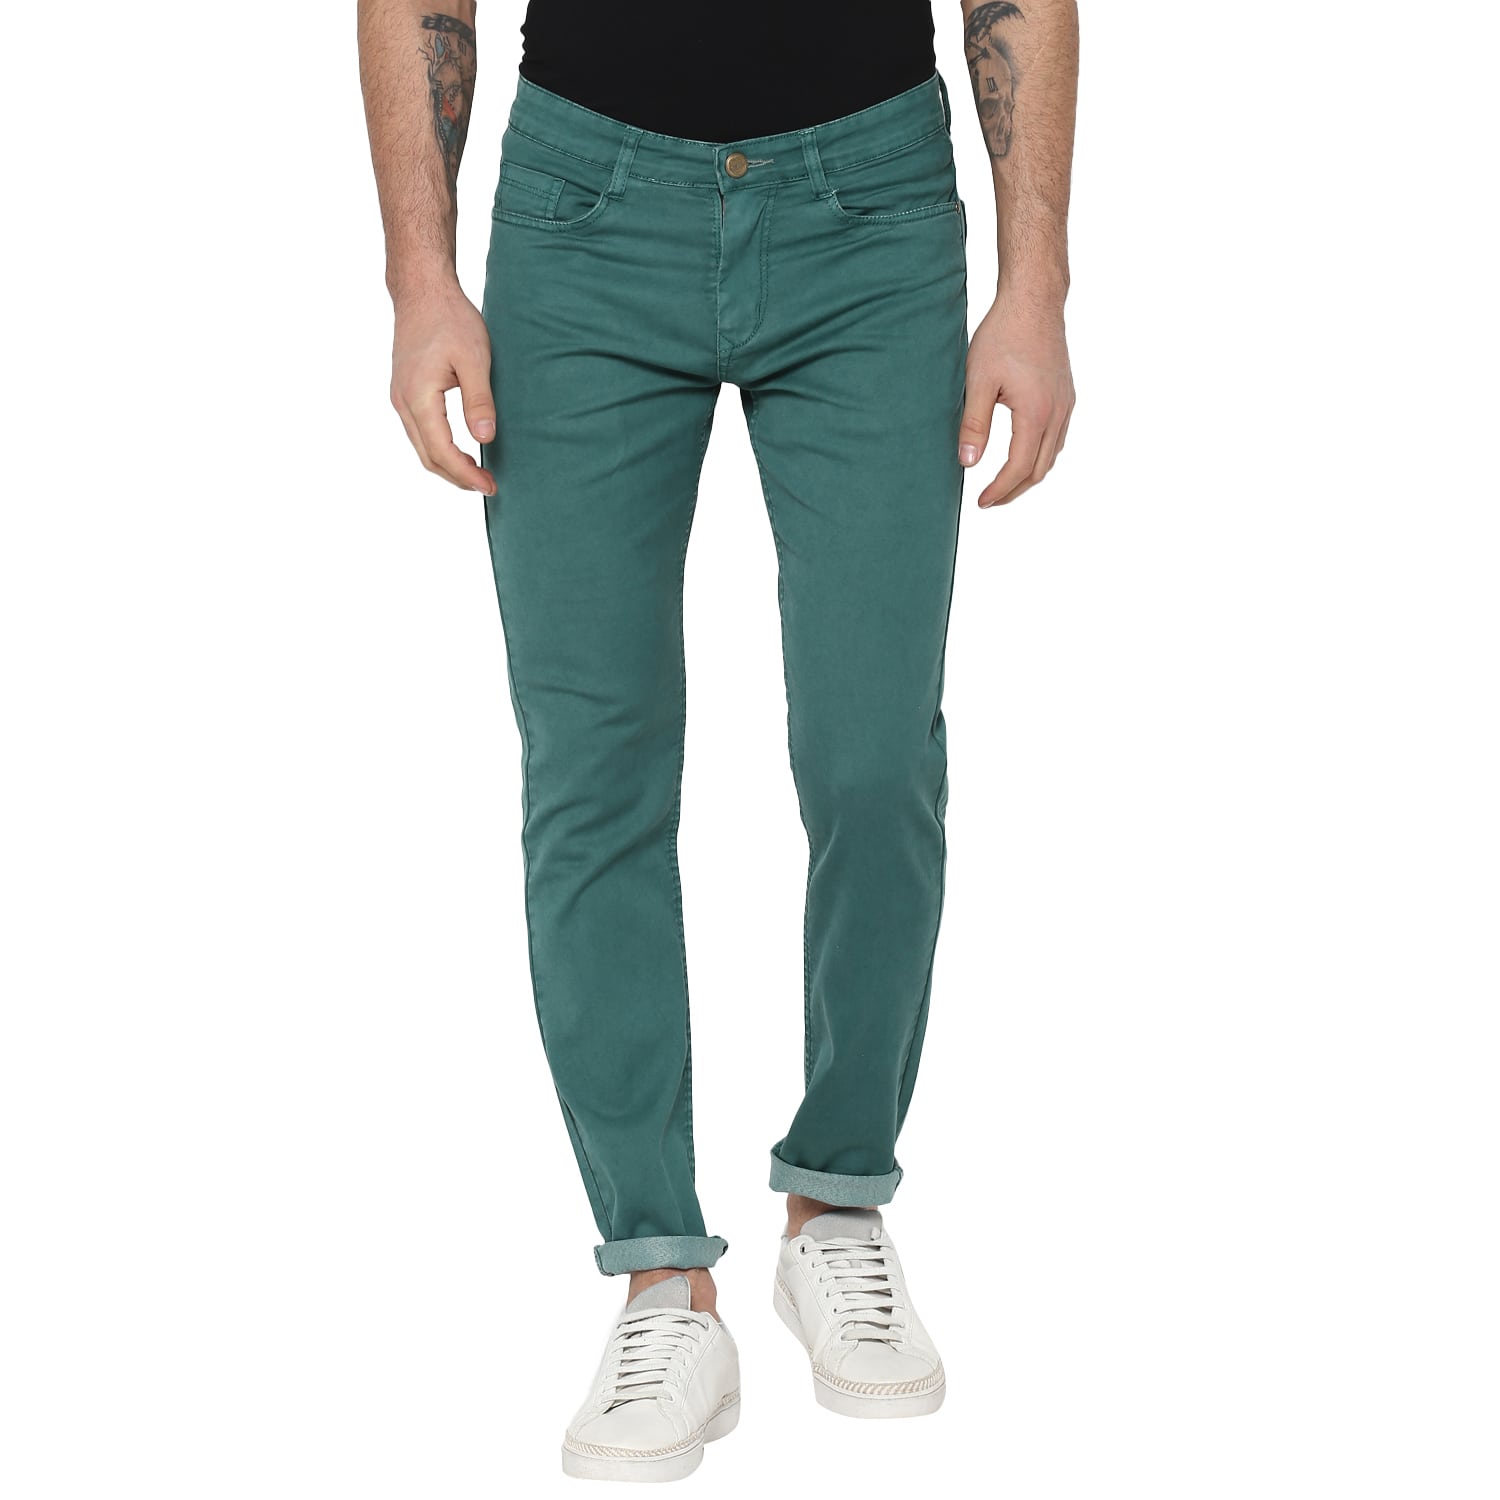 Men's Sea Green Slim Fit Washed Jeans Stretchable